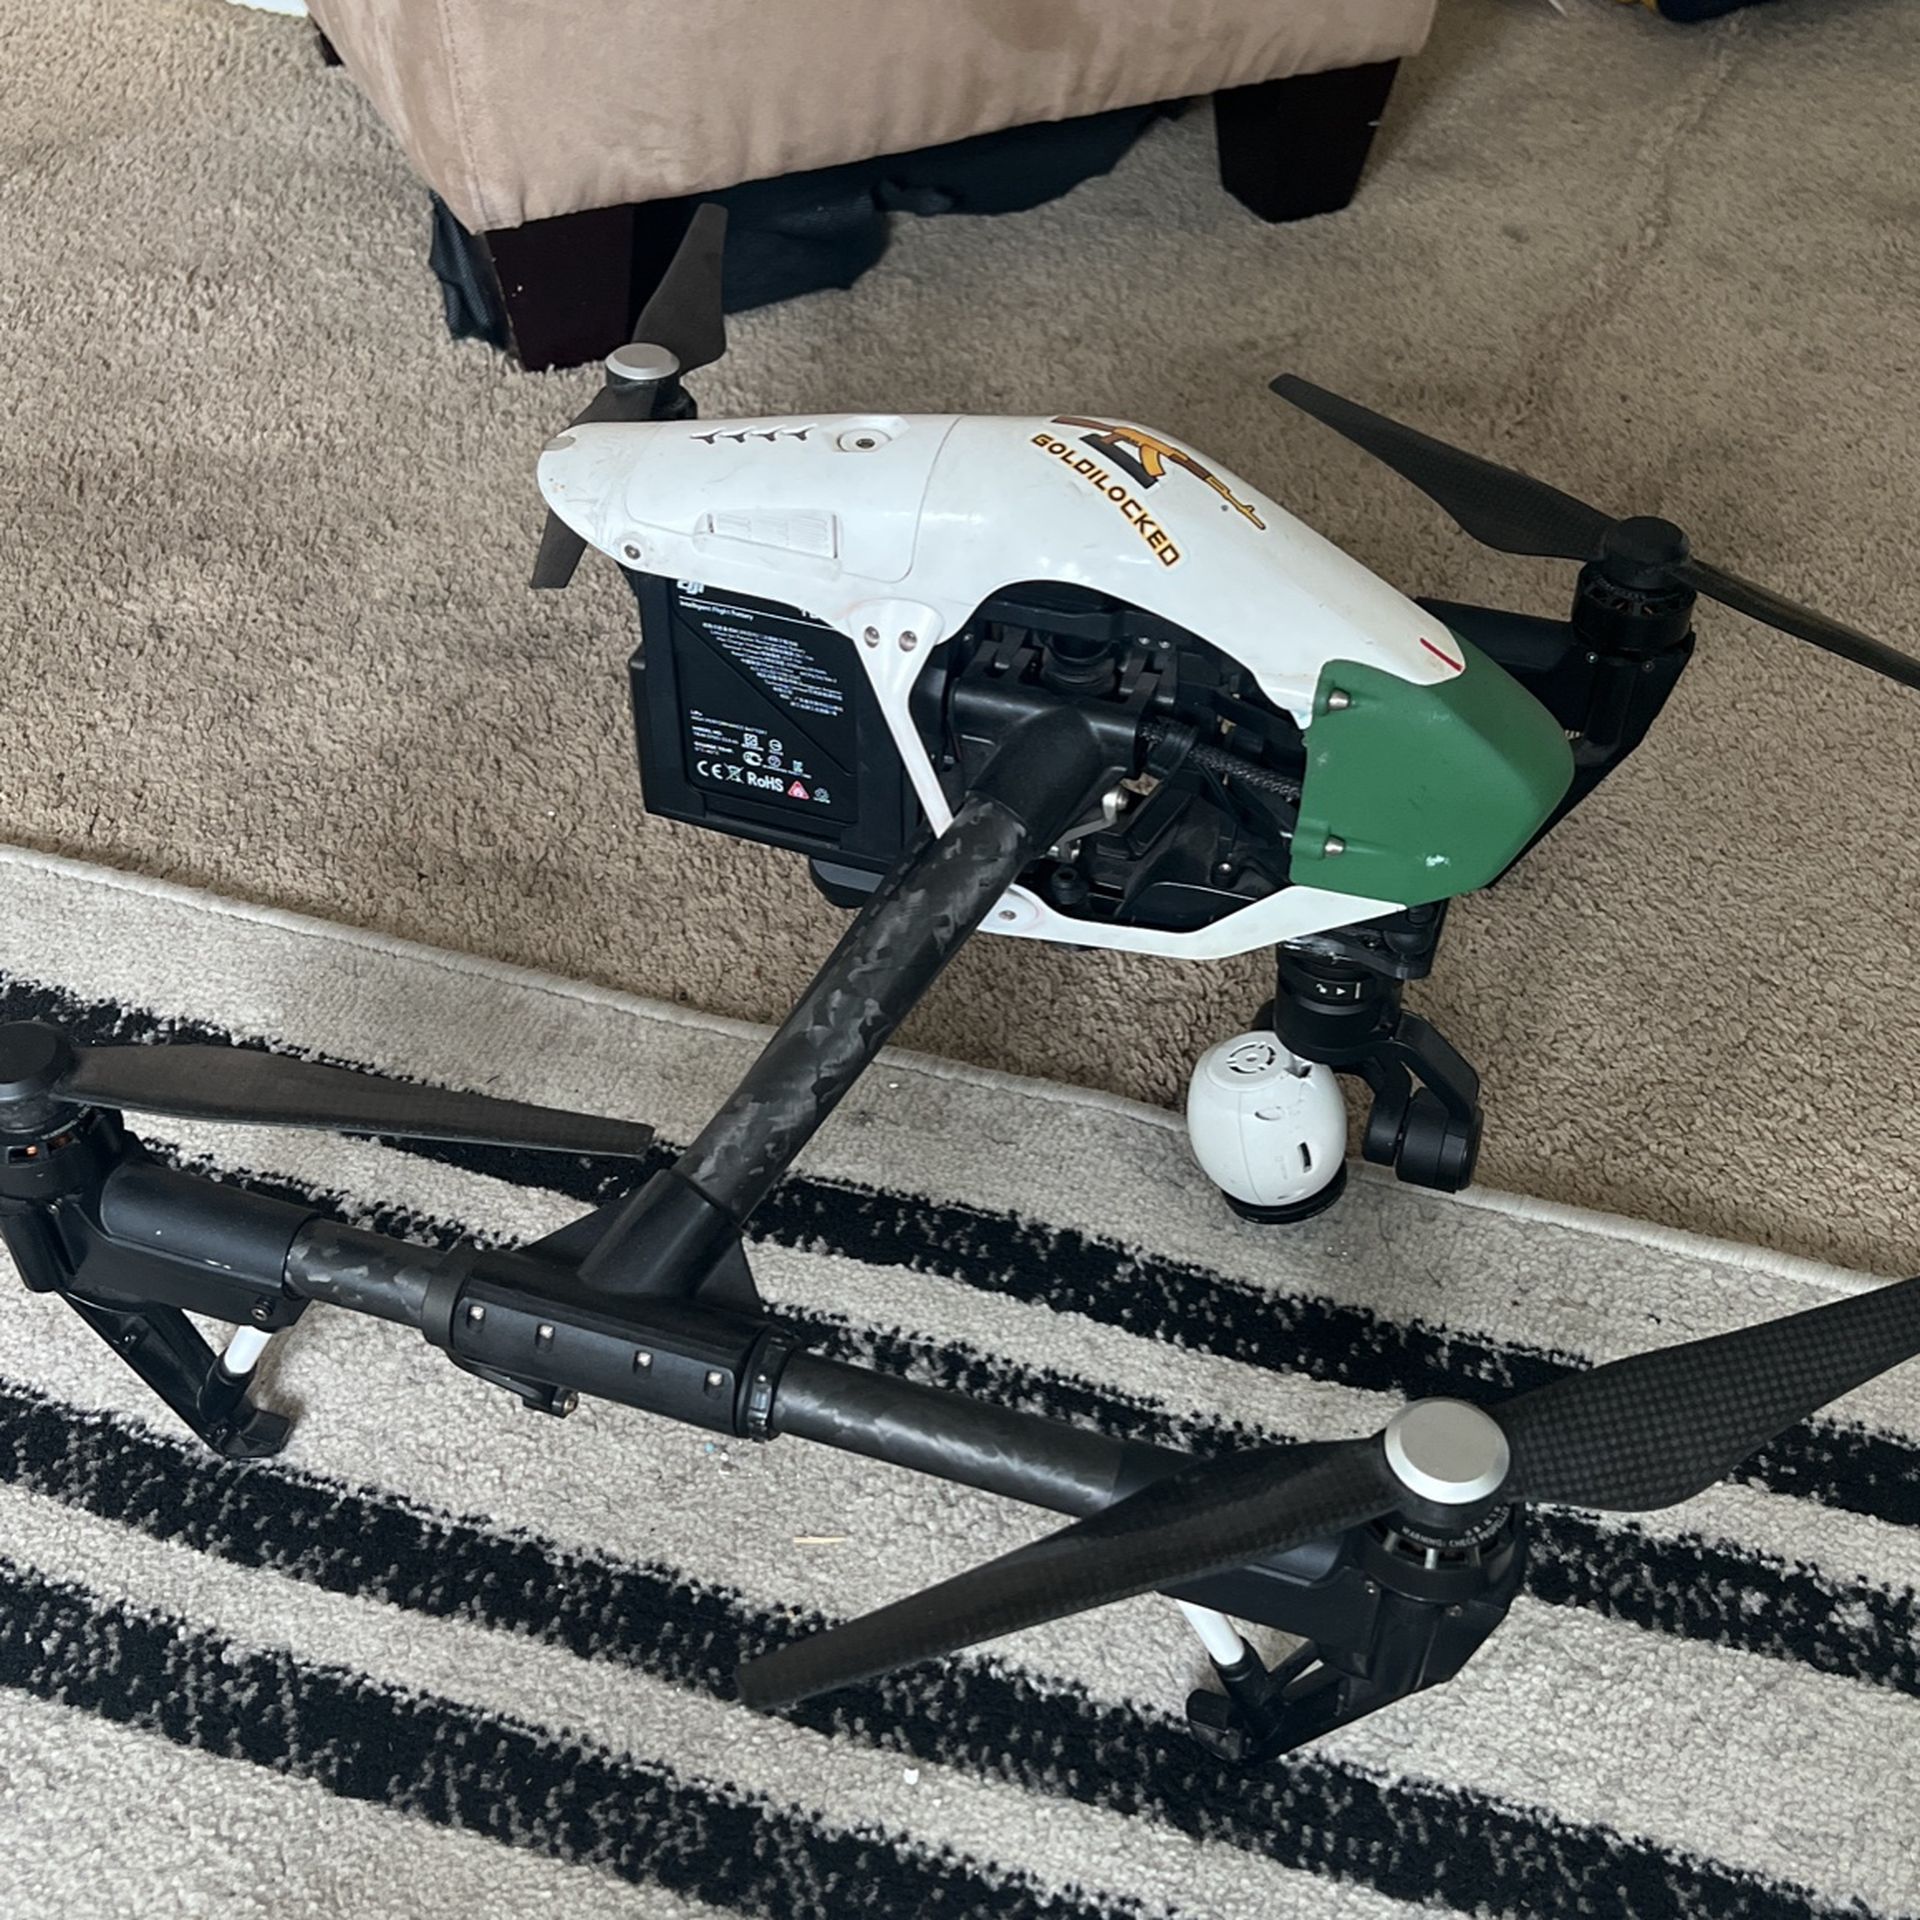 DJI Inspire 1 With Controller Ready To Fly